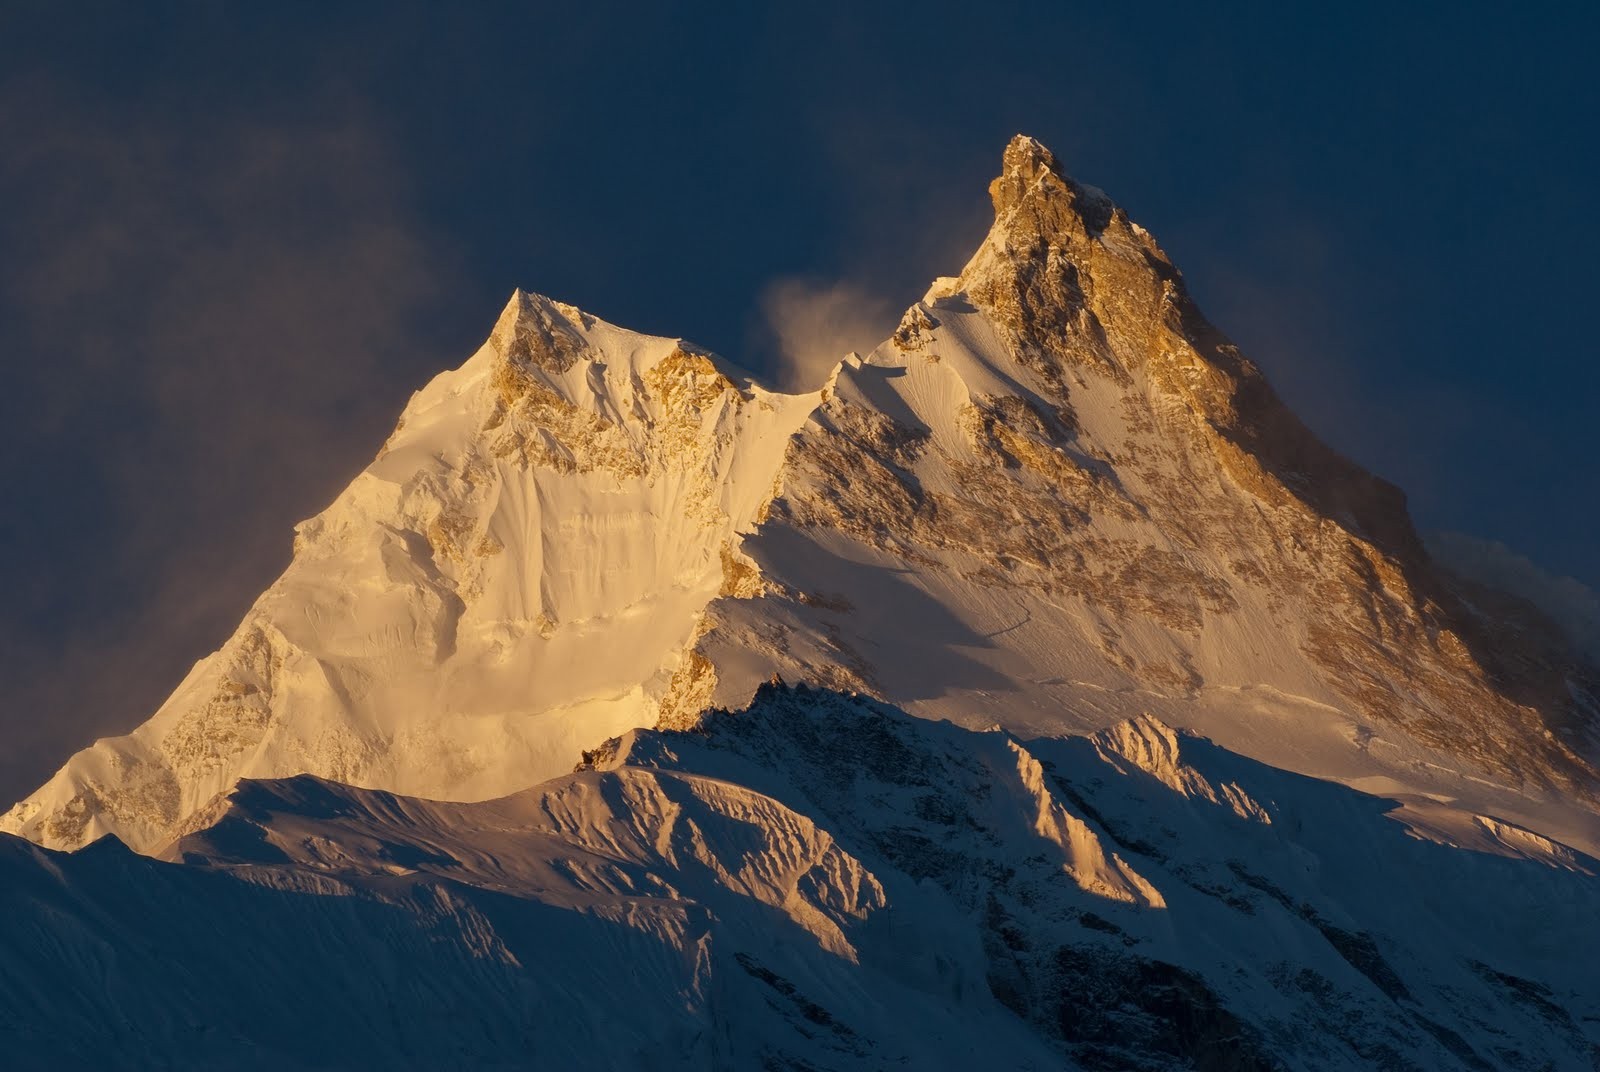 General 1600x1072 Nepal Himalayas mountains snow landscape Asia nature ice cold snowy peak